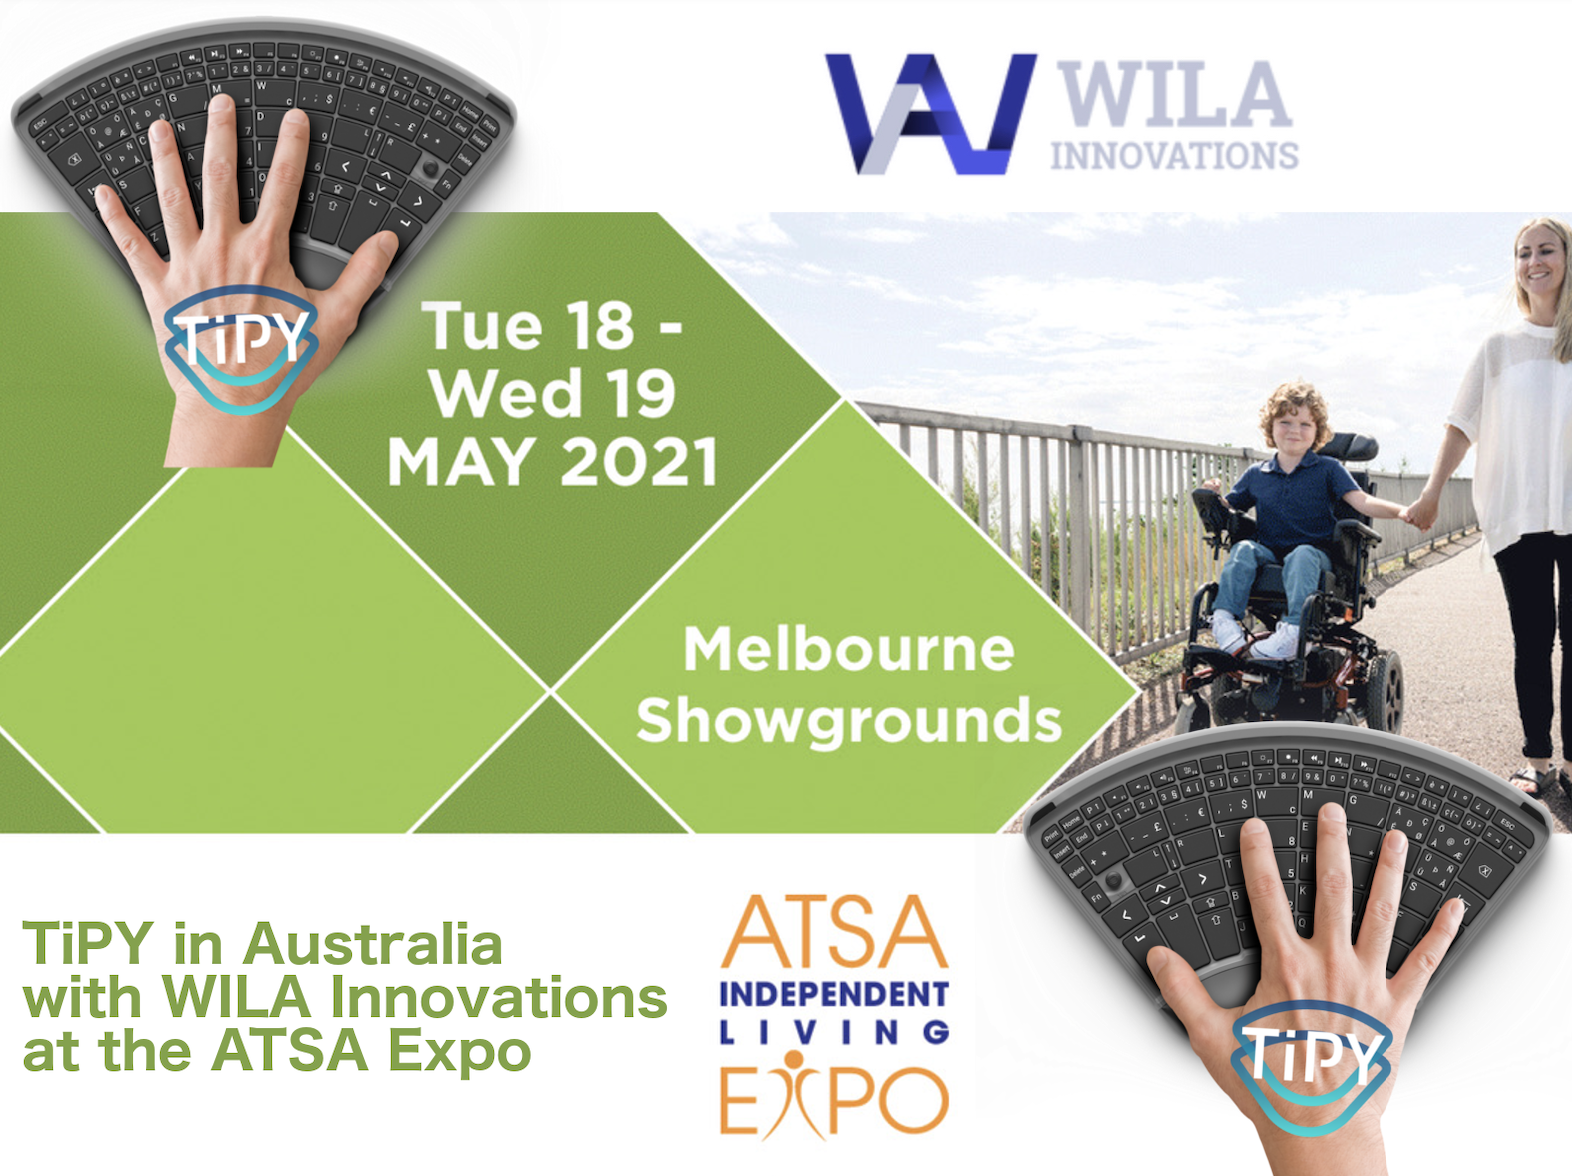 TiPY with WILA Innovations at the ATSA Expo in Melbourne Australia